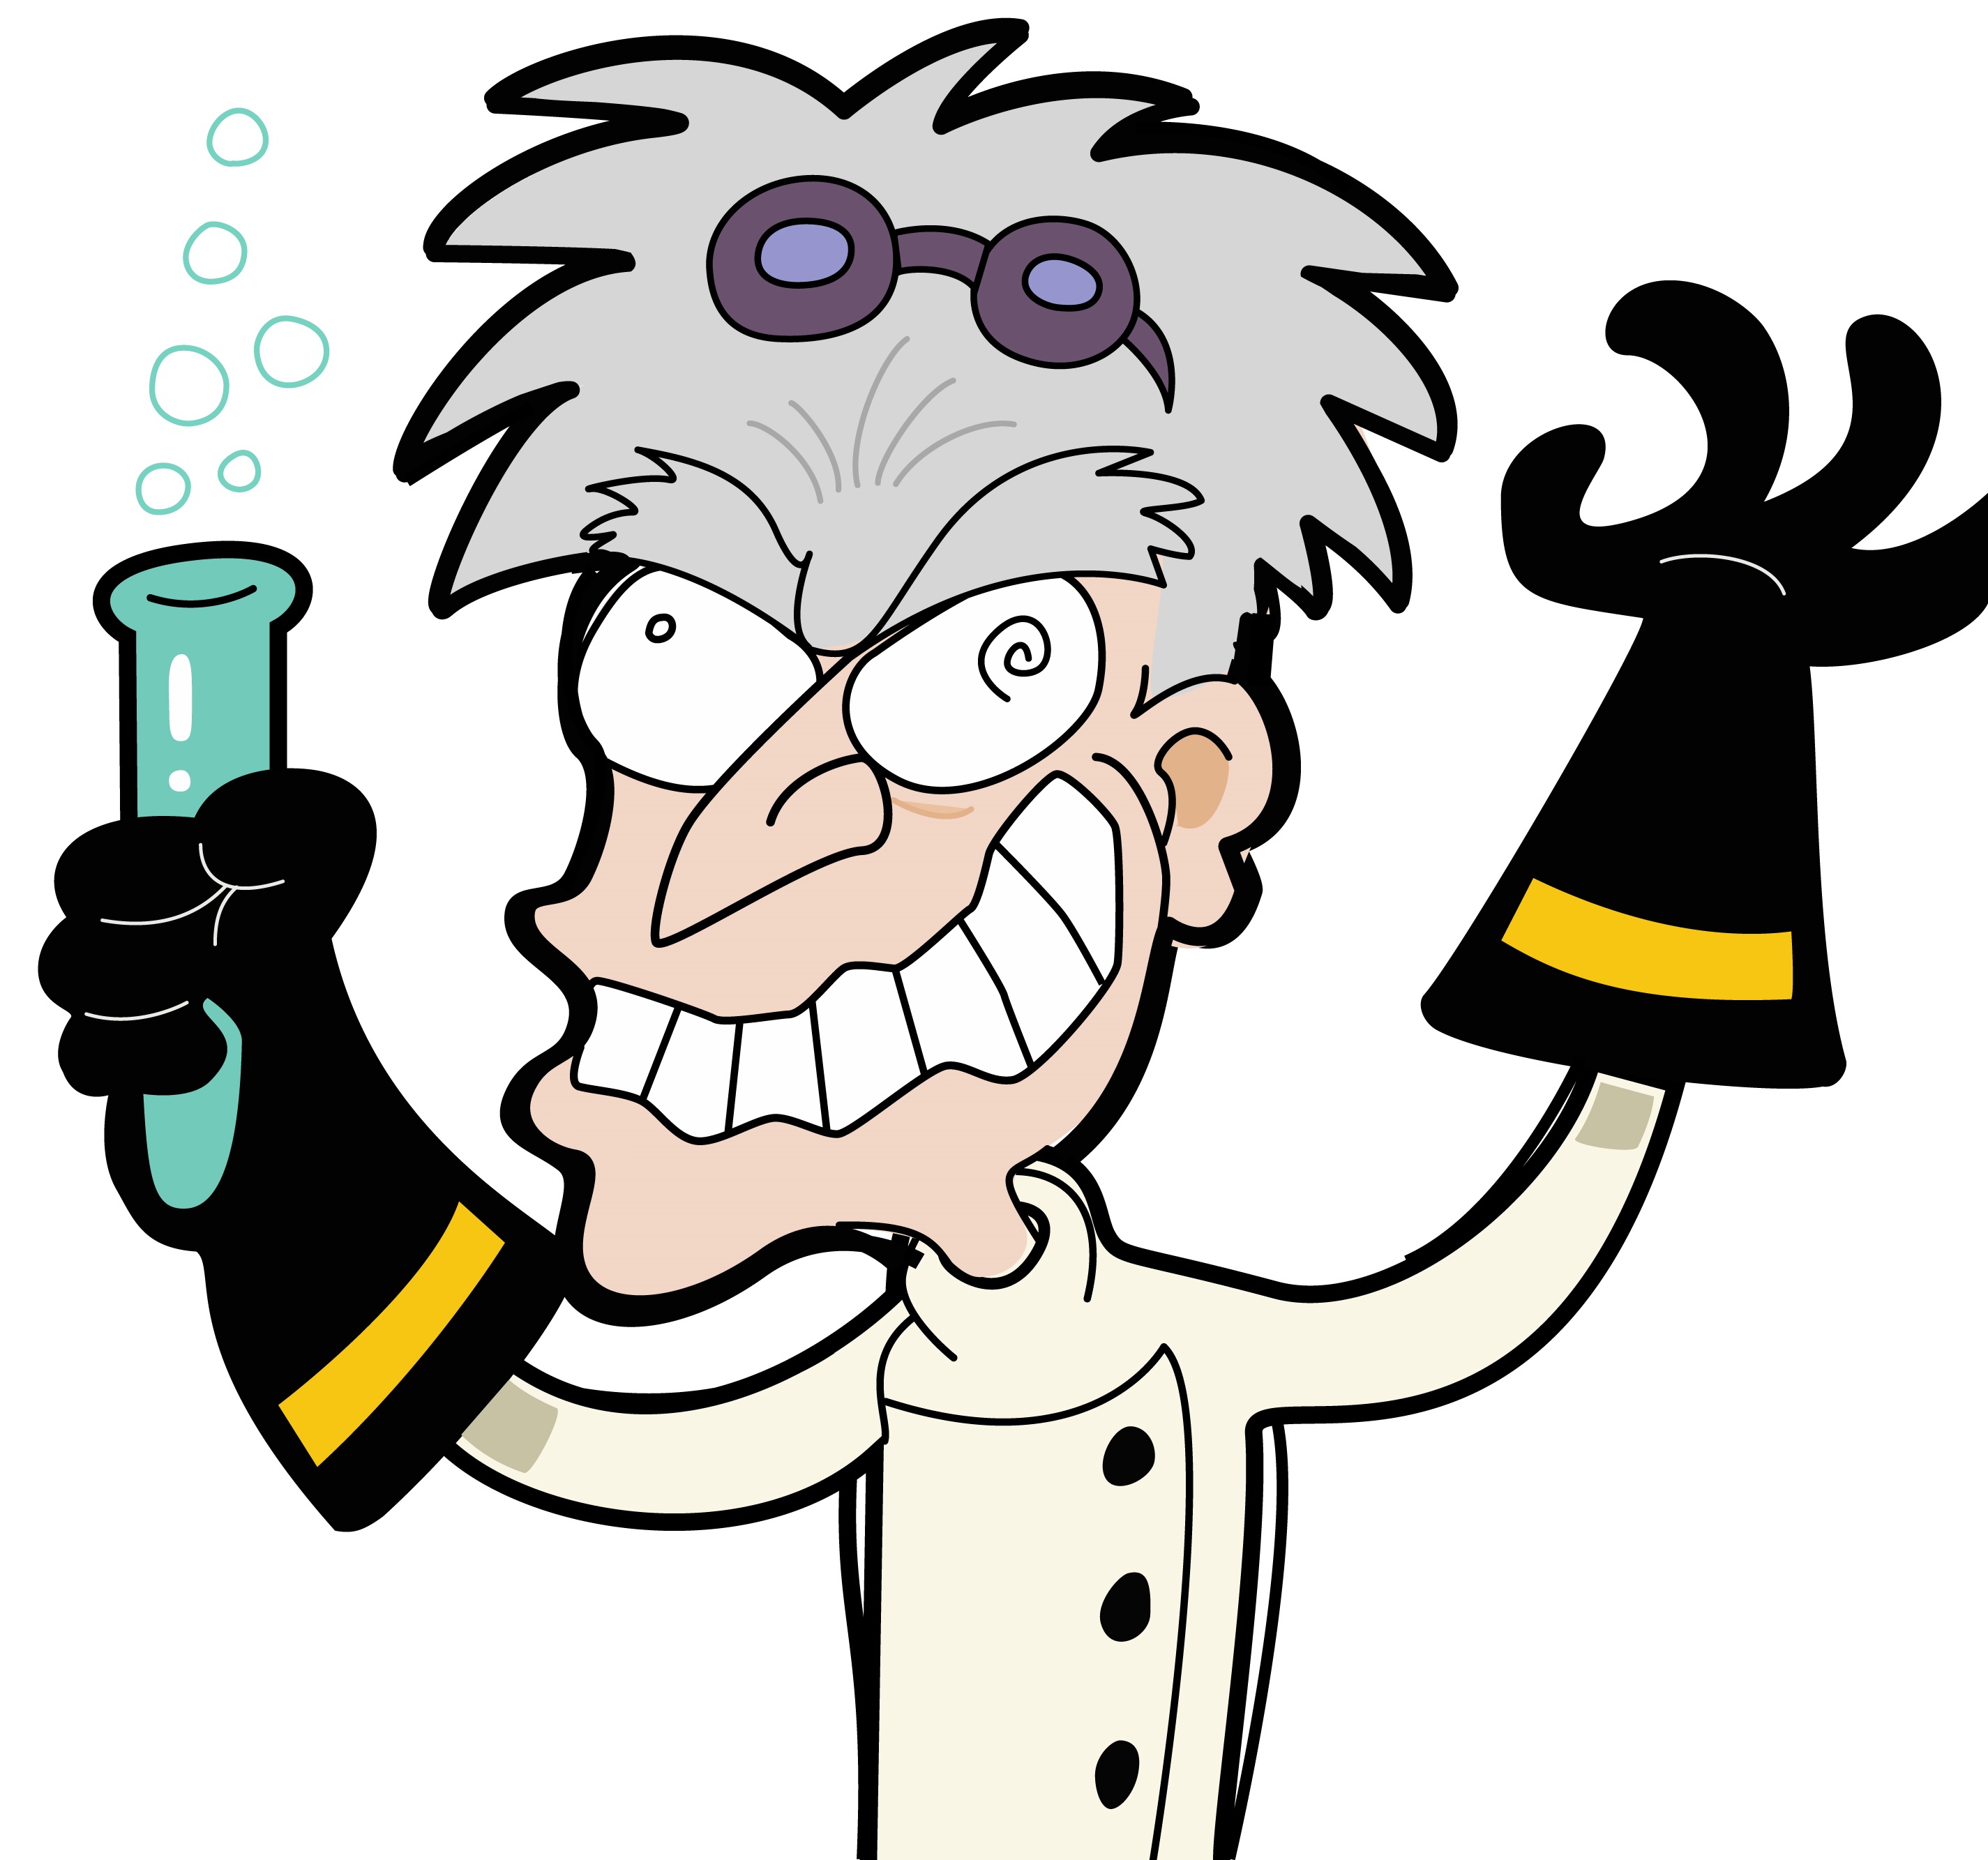 45360730647c1f25009879900520a - Mad Scientist Clipart